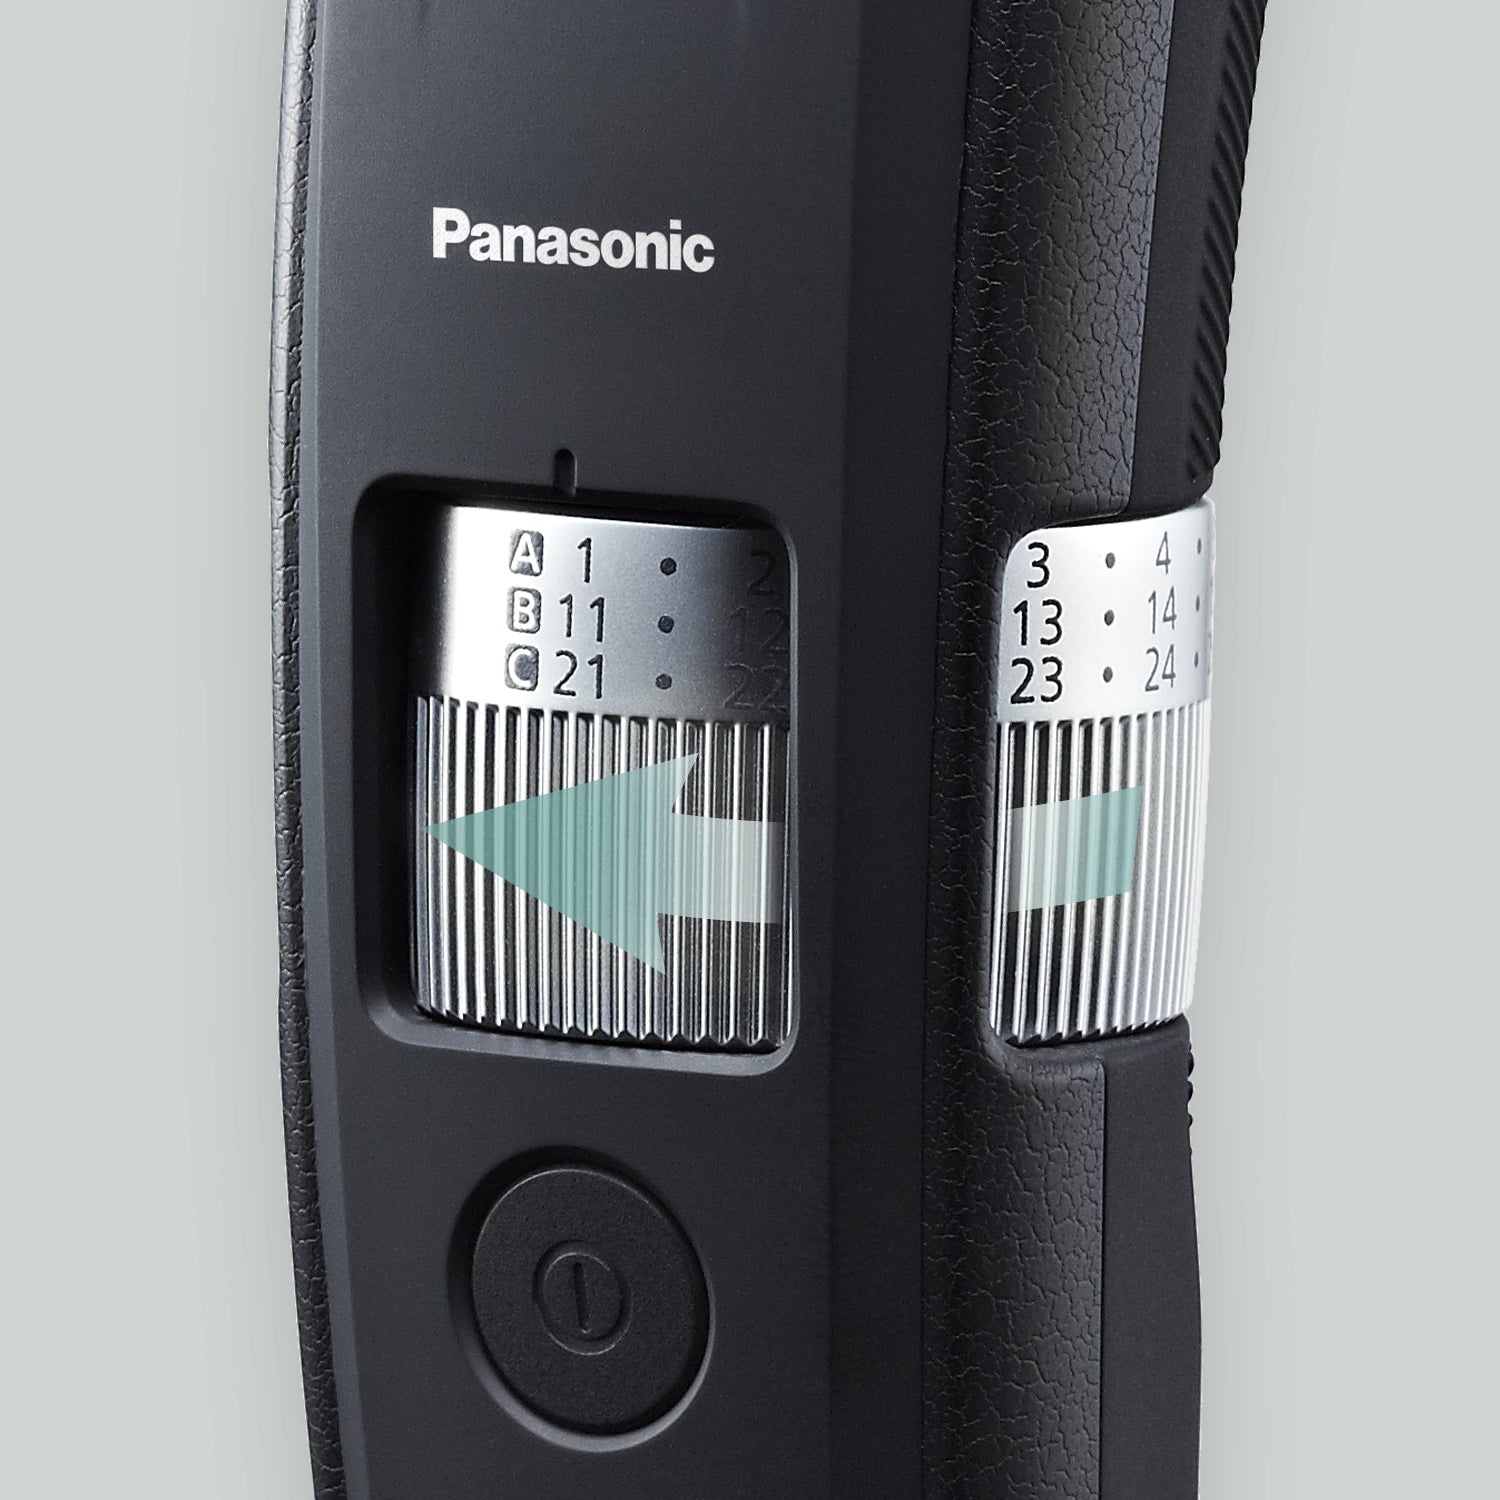 Panasonic Long Beard Hair Trimmer - Length Attachments Comb 58 ER-GB96-K with and Adjustable Settings 4